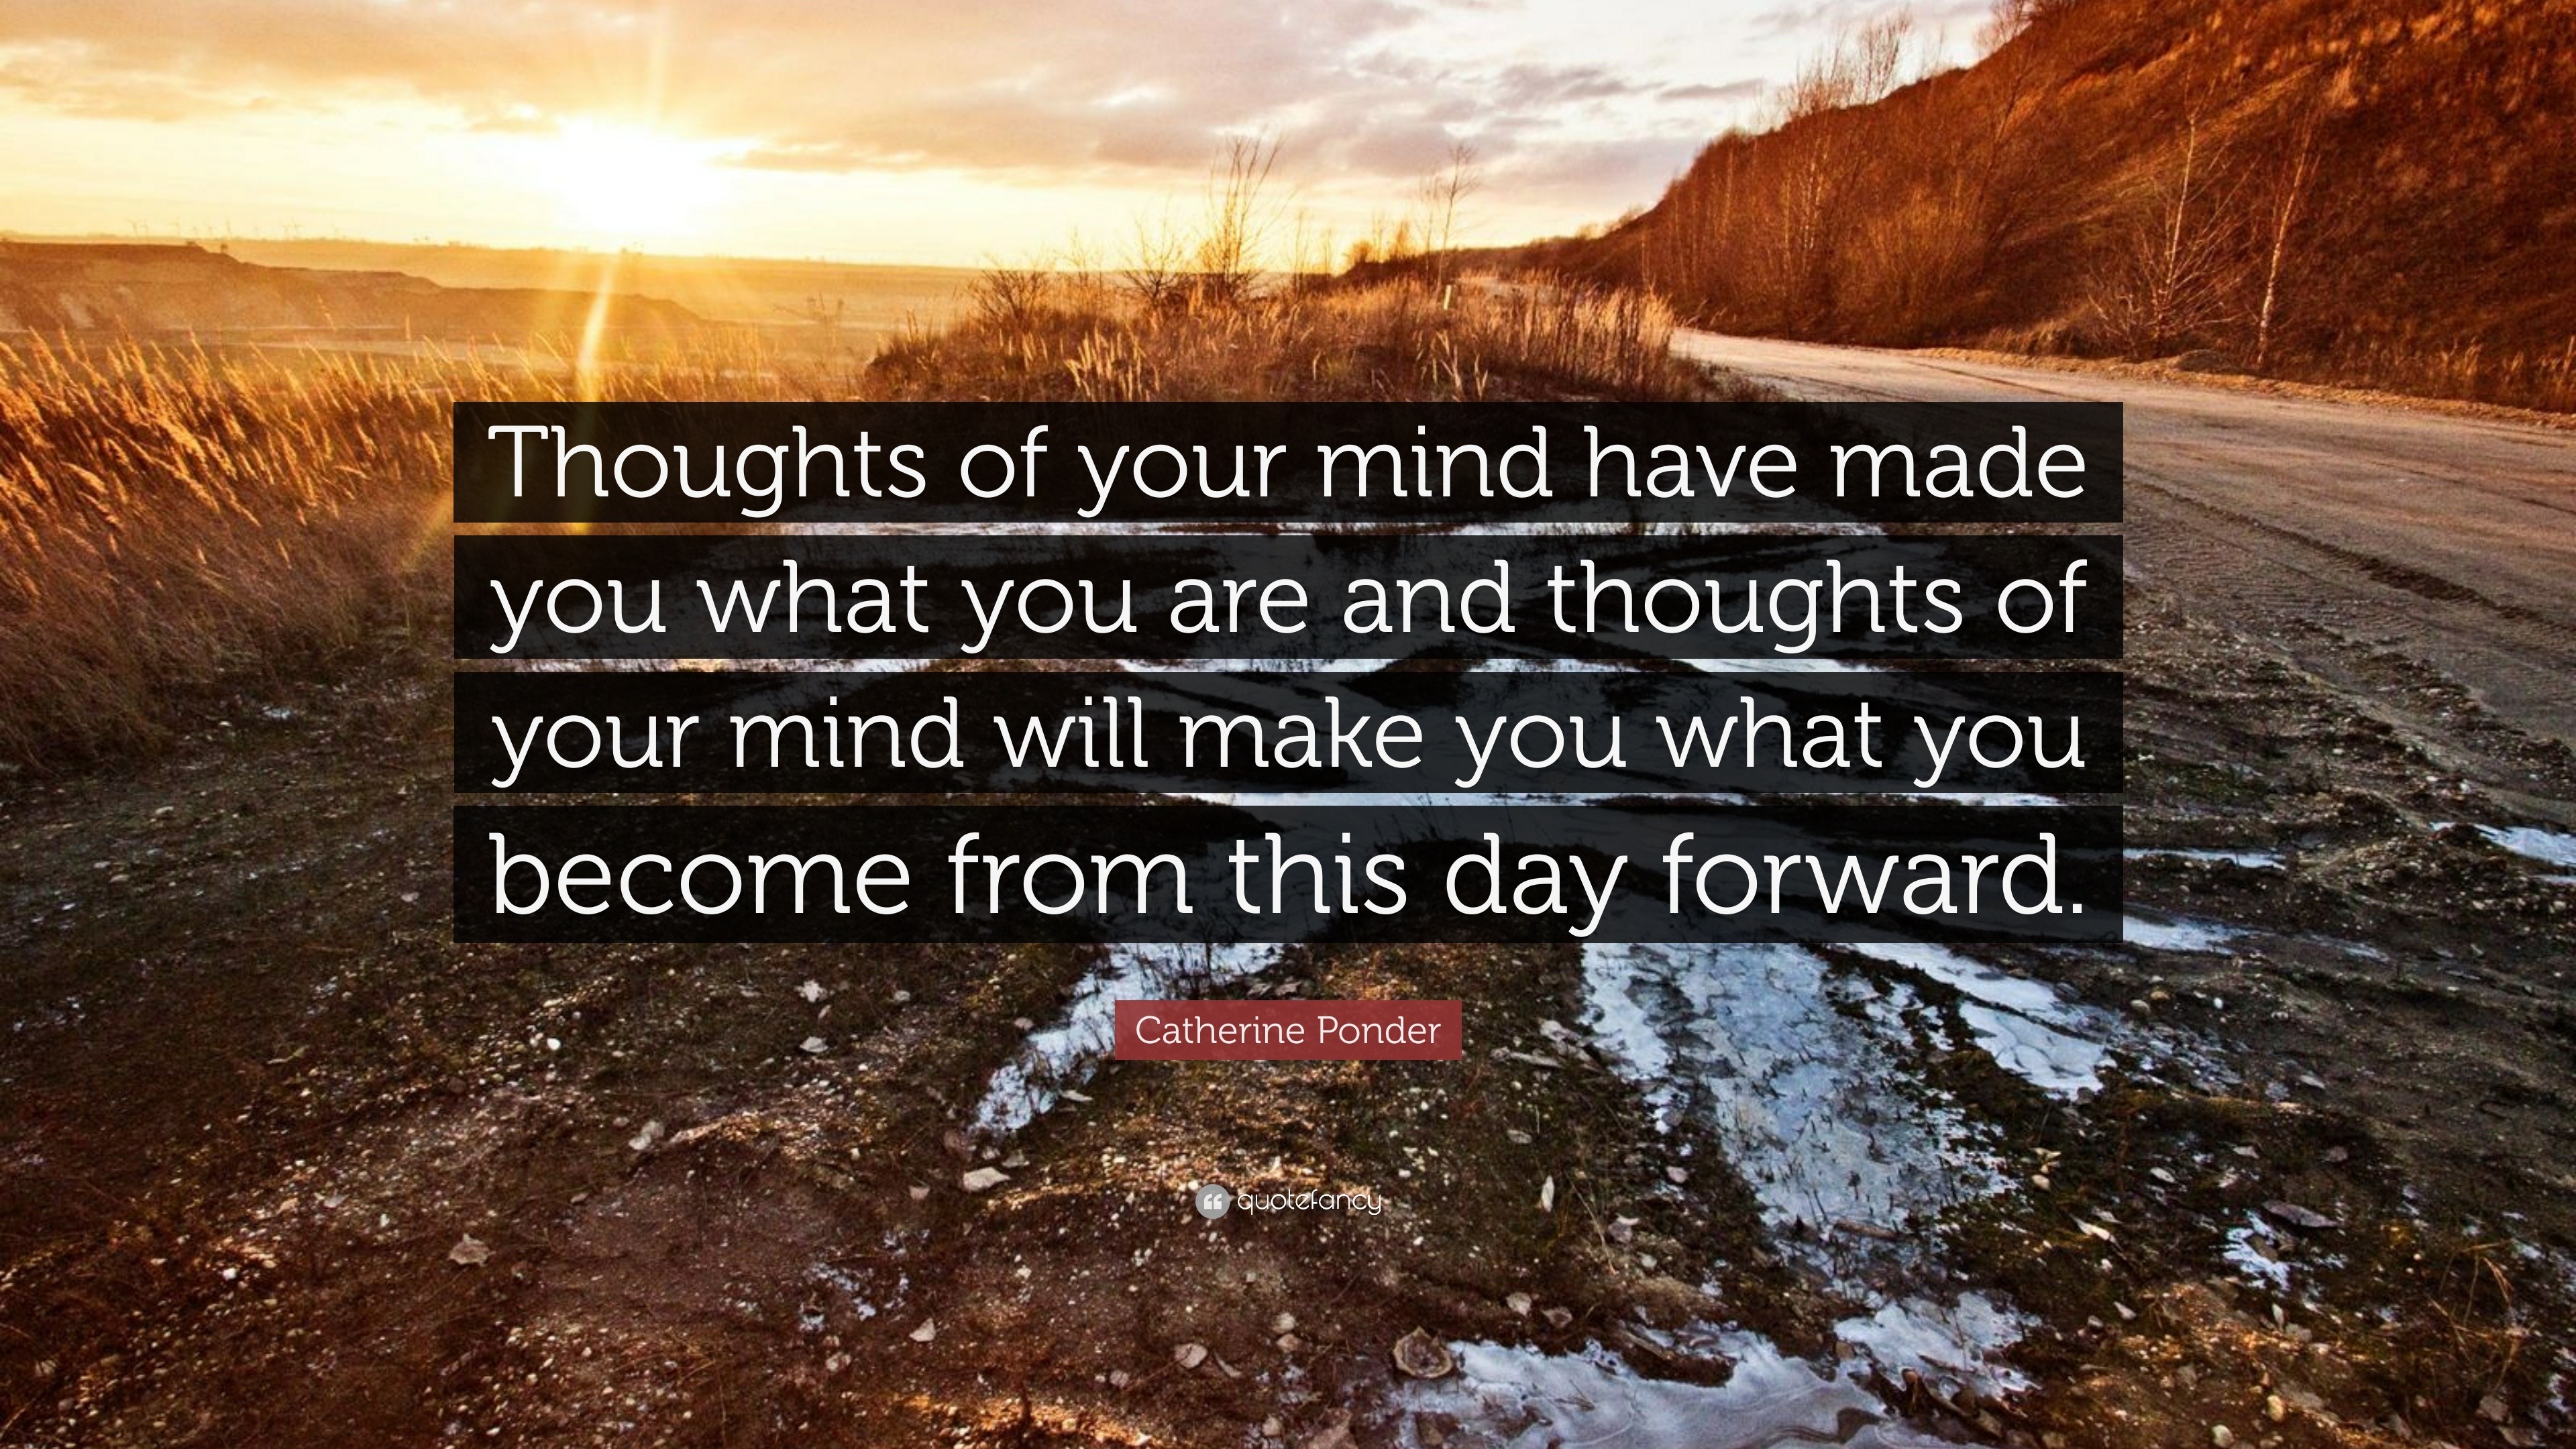 Catherine Ponder Quote “Thoughts of your mind have made you what you are and